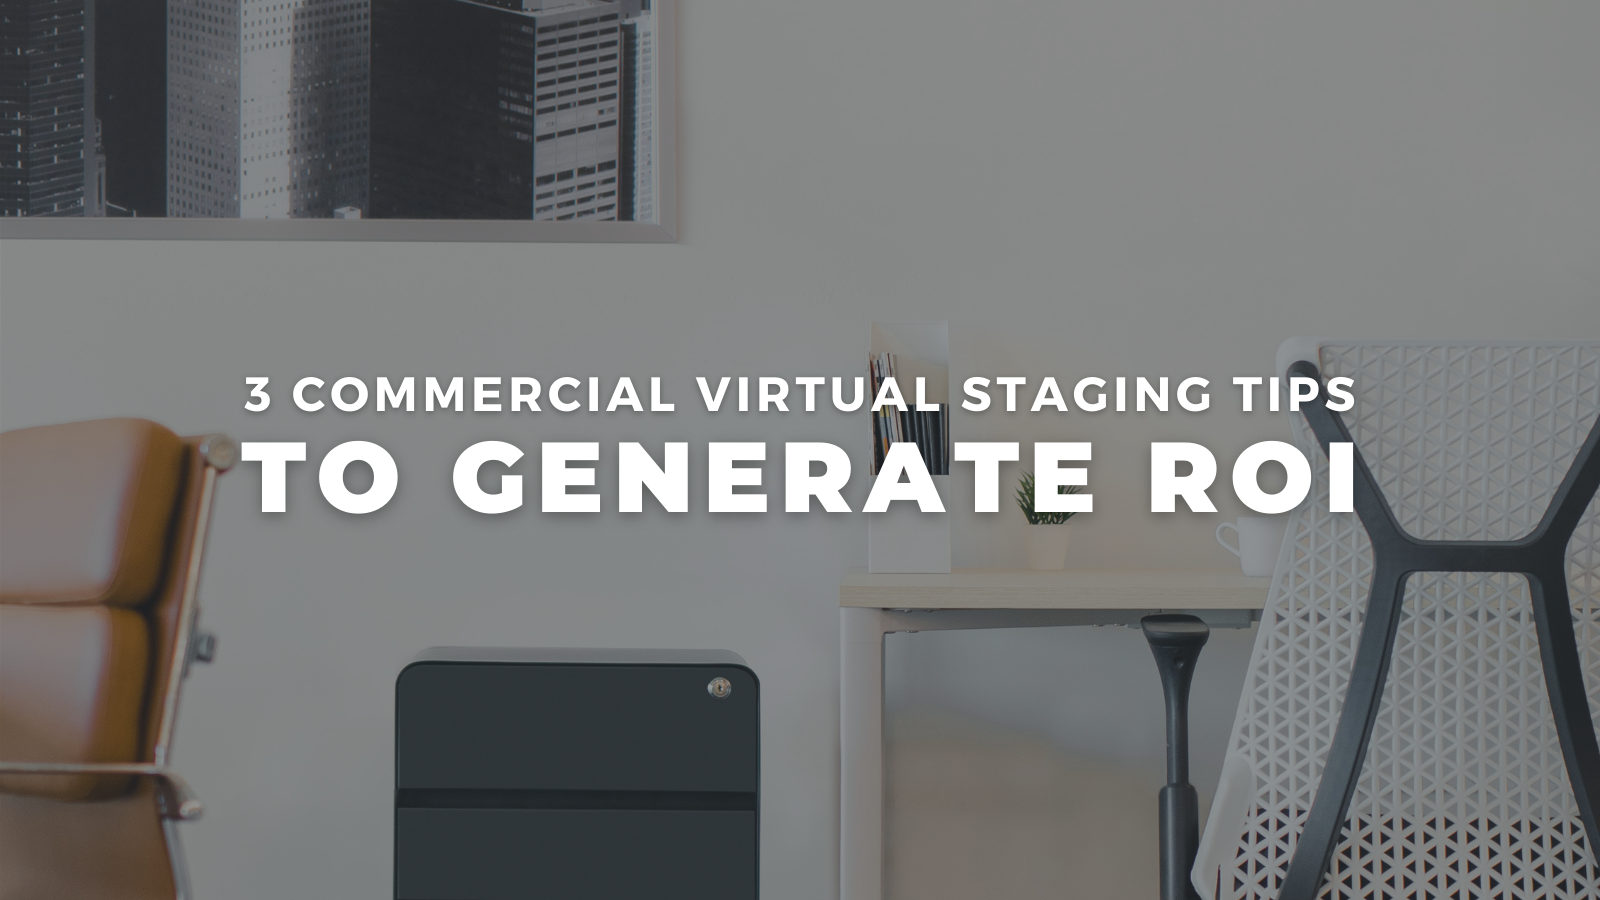 3 Commercial Virtual Staging Tips to Generate ROI